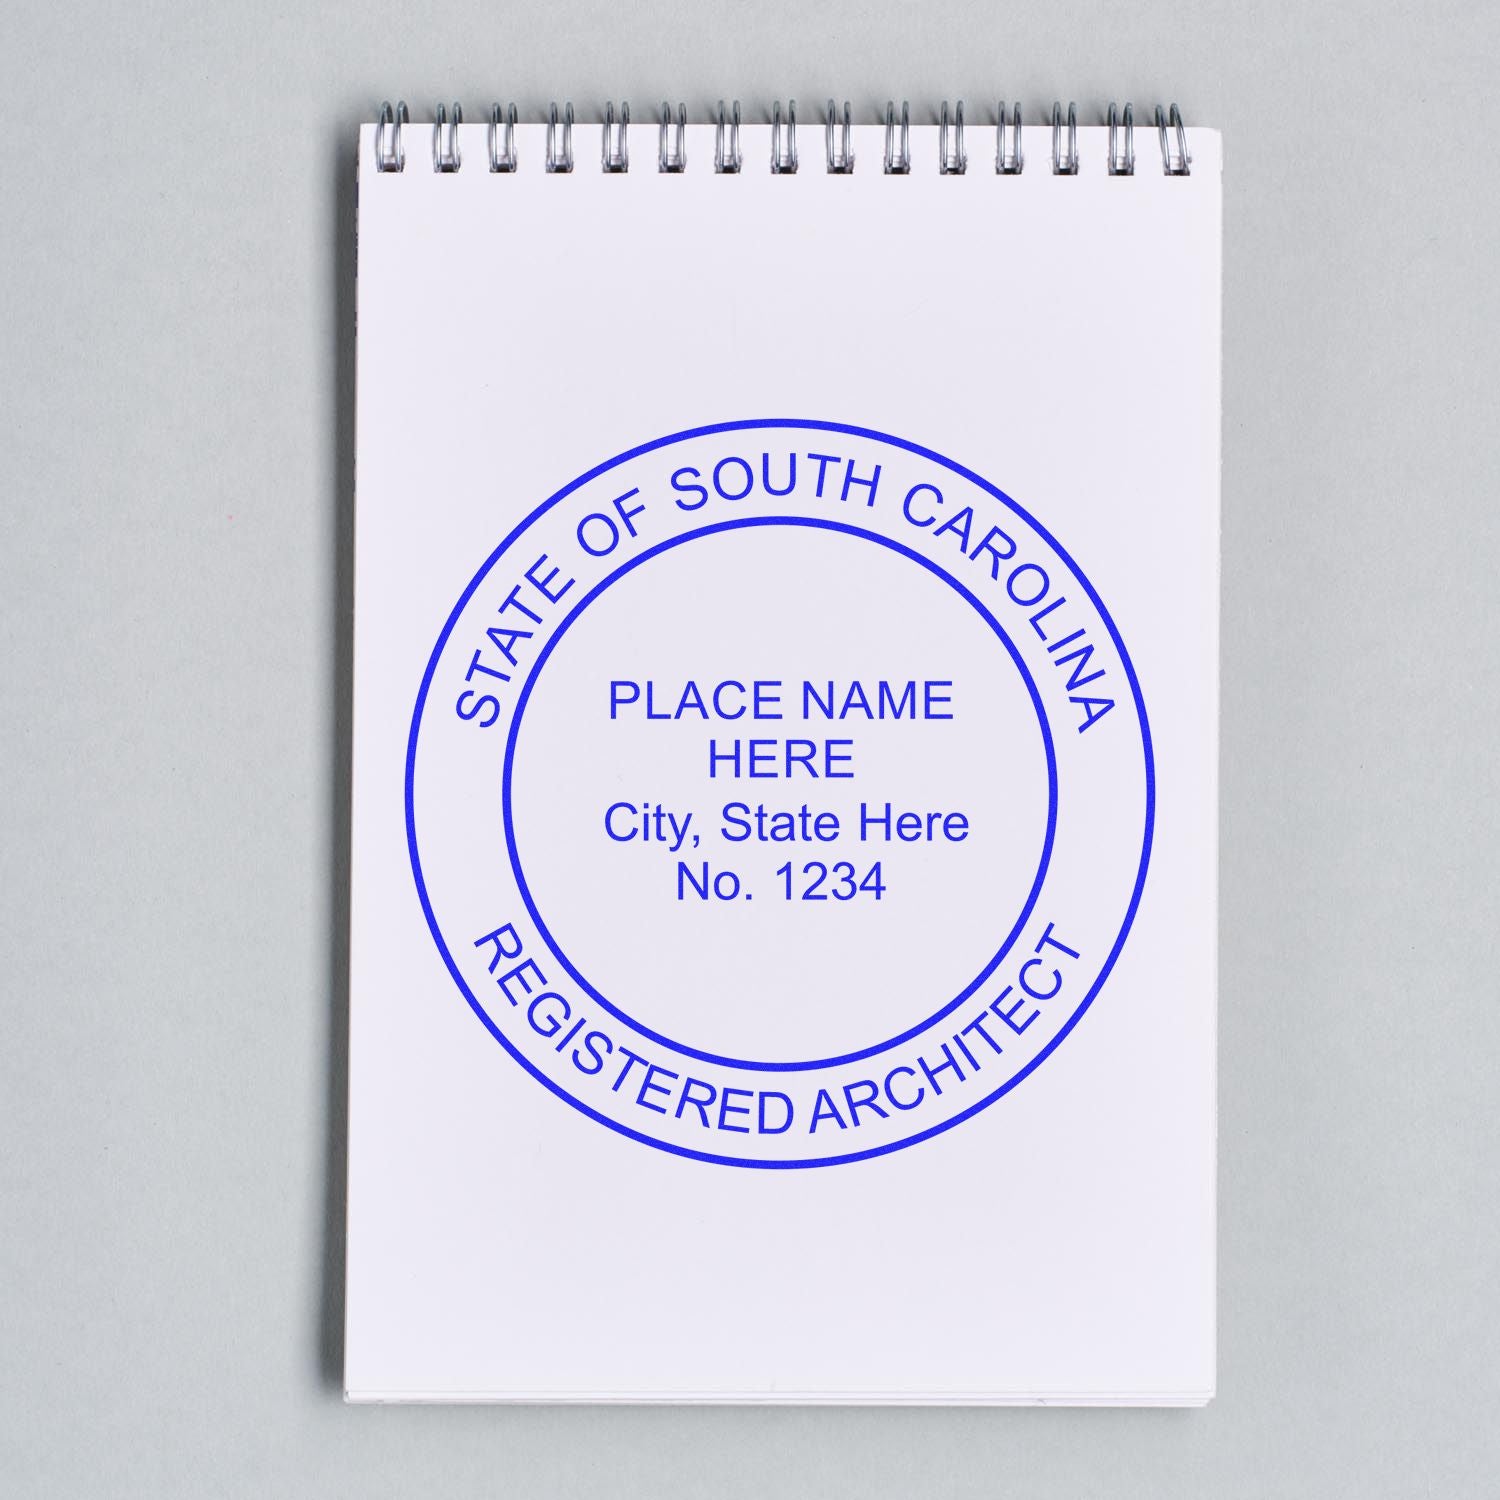 Navigate with Confidence: Understanding South Carolina Architect Stamp Guidelines Navigate with Confidence: Understanding South Carolina Architect Stamp Guidelines Feature Image